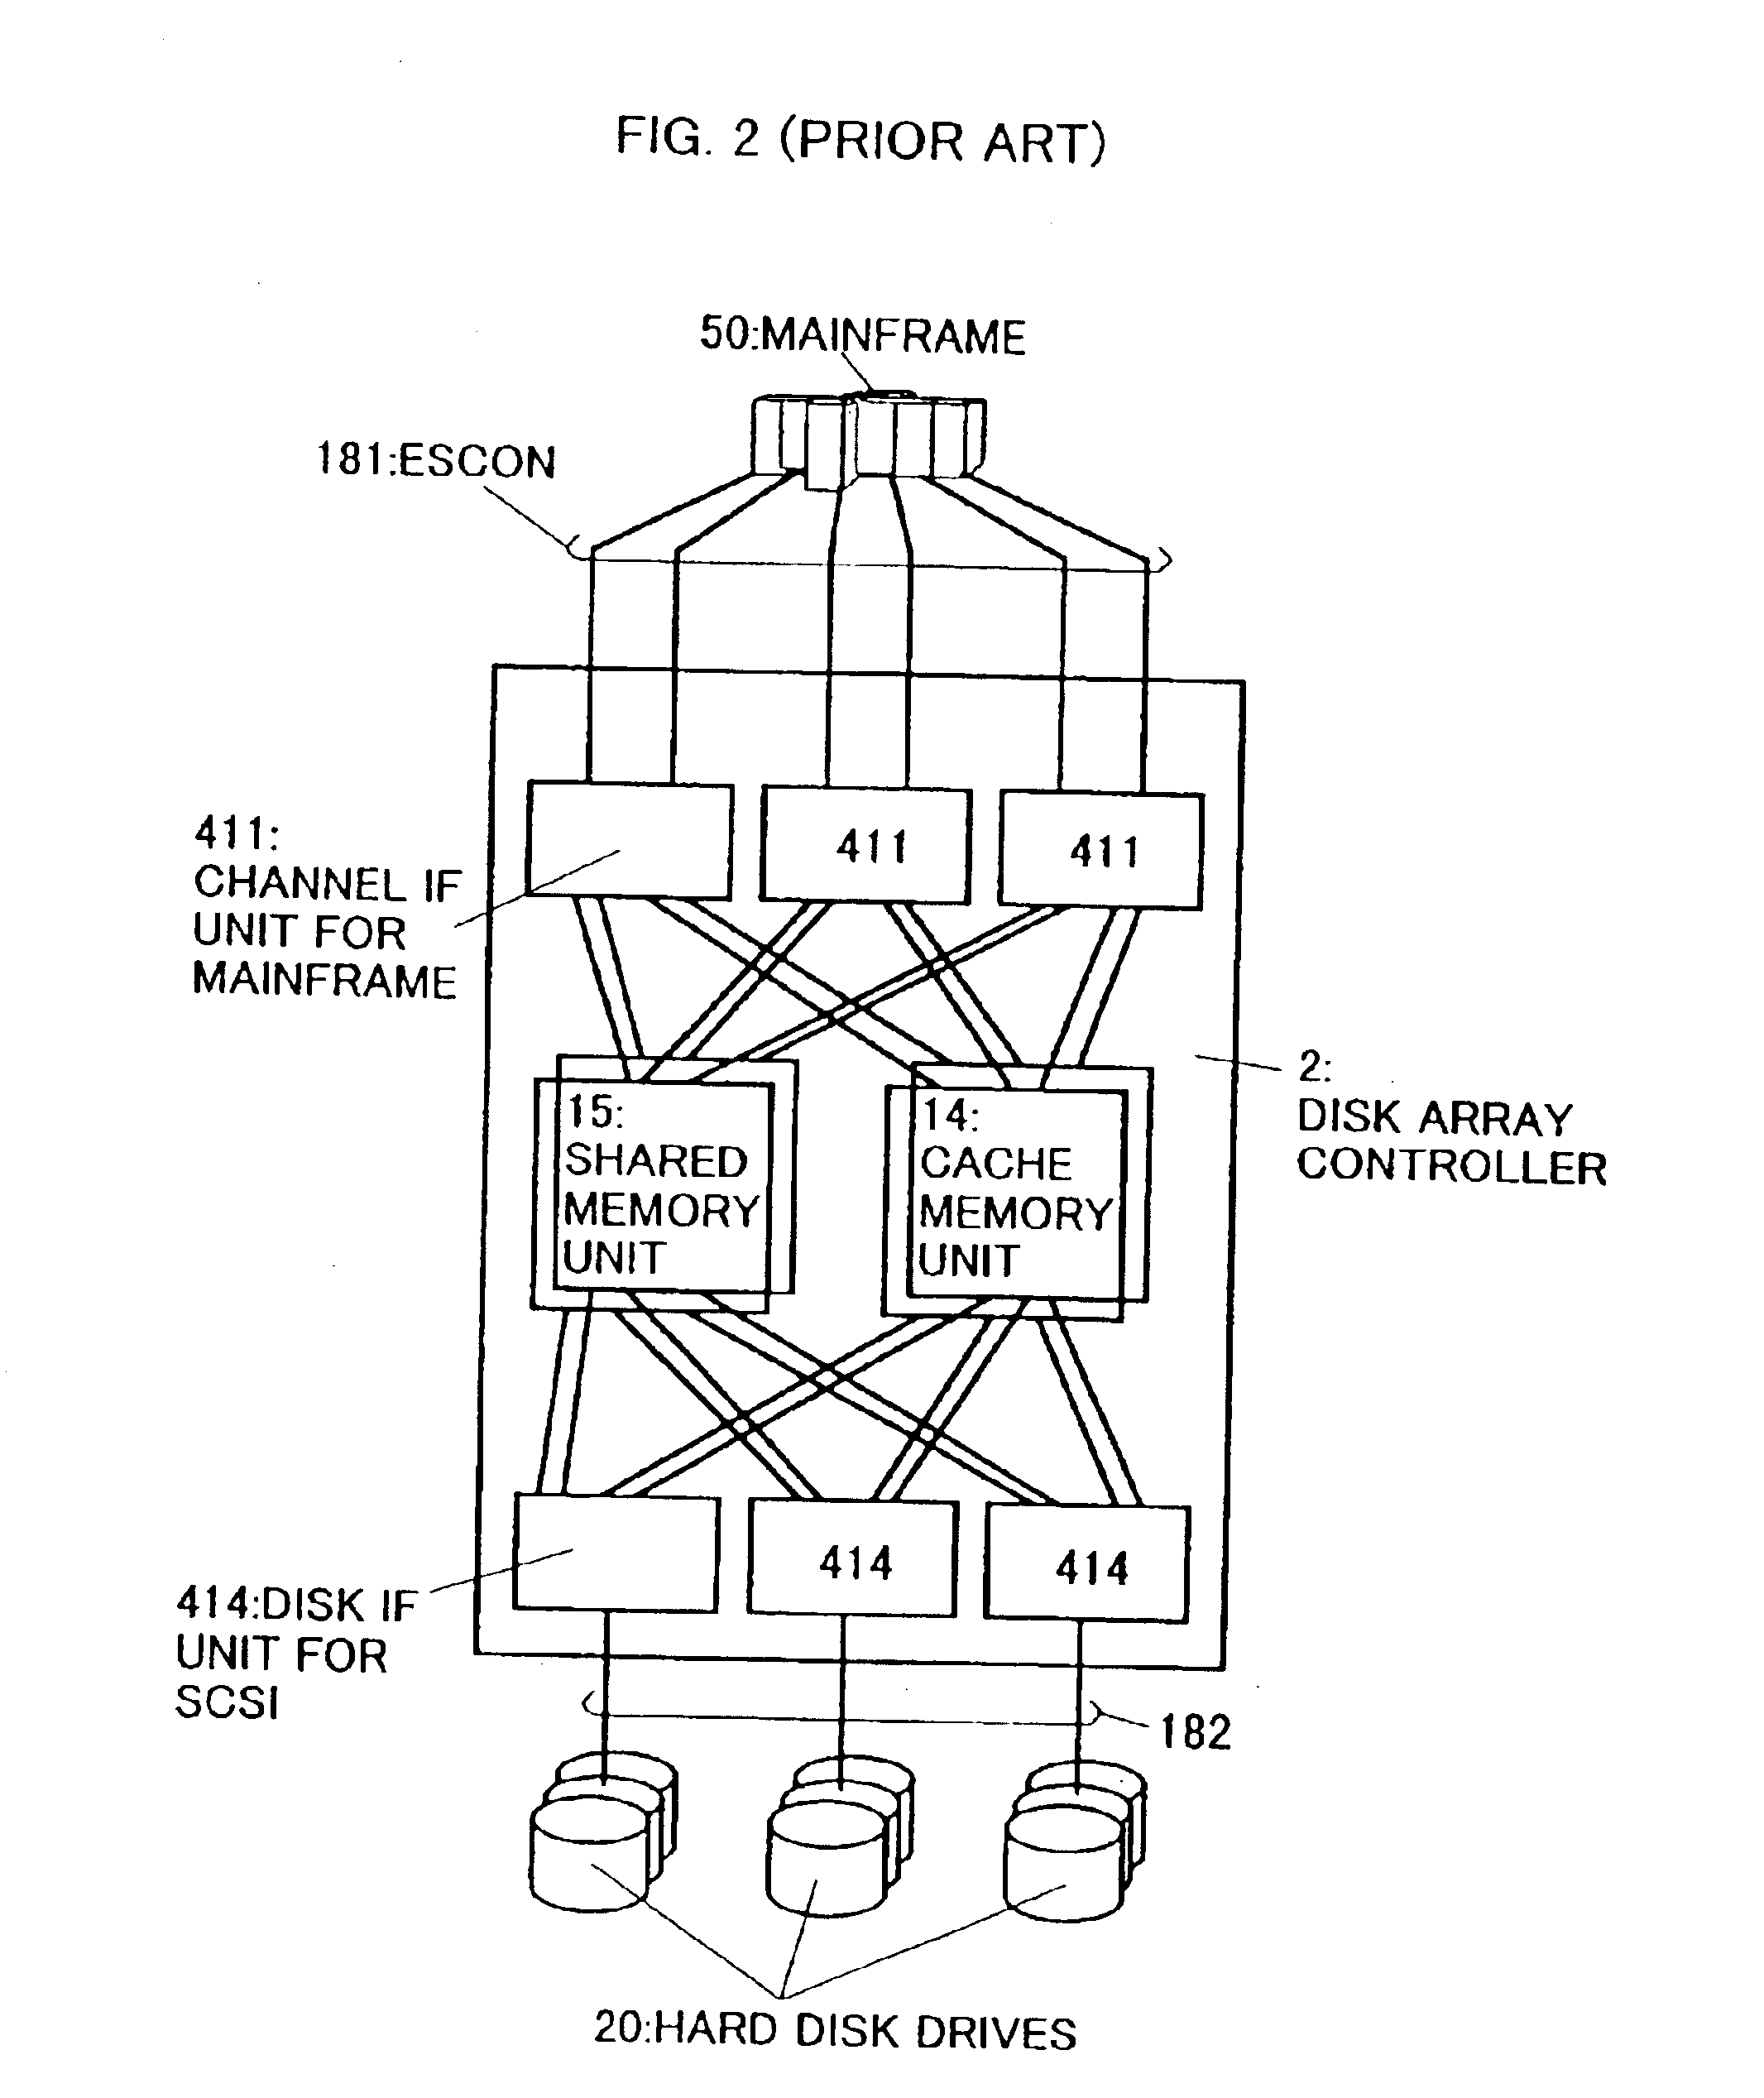 Disk array control device with an internal connection system for efficient data transfer